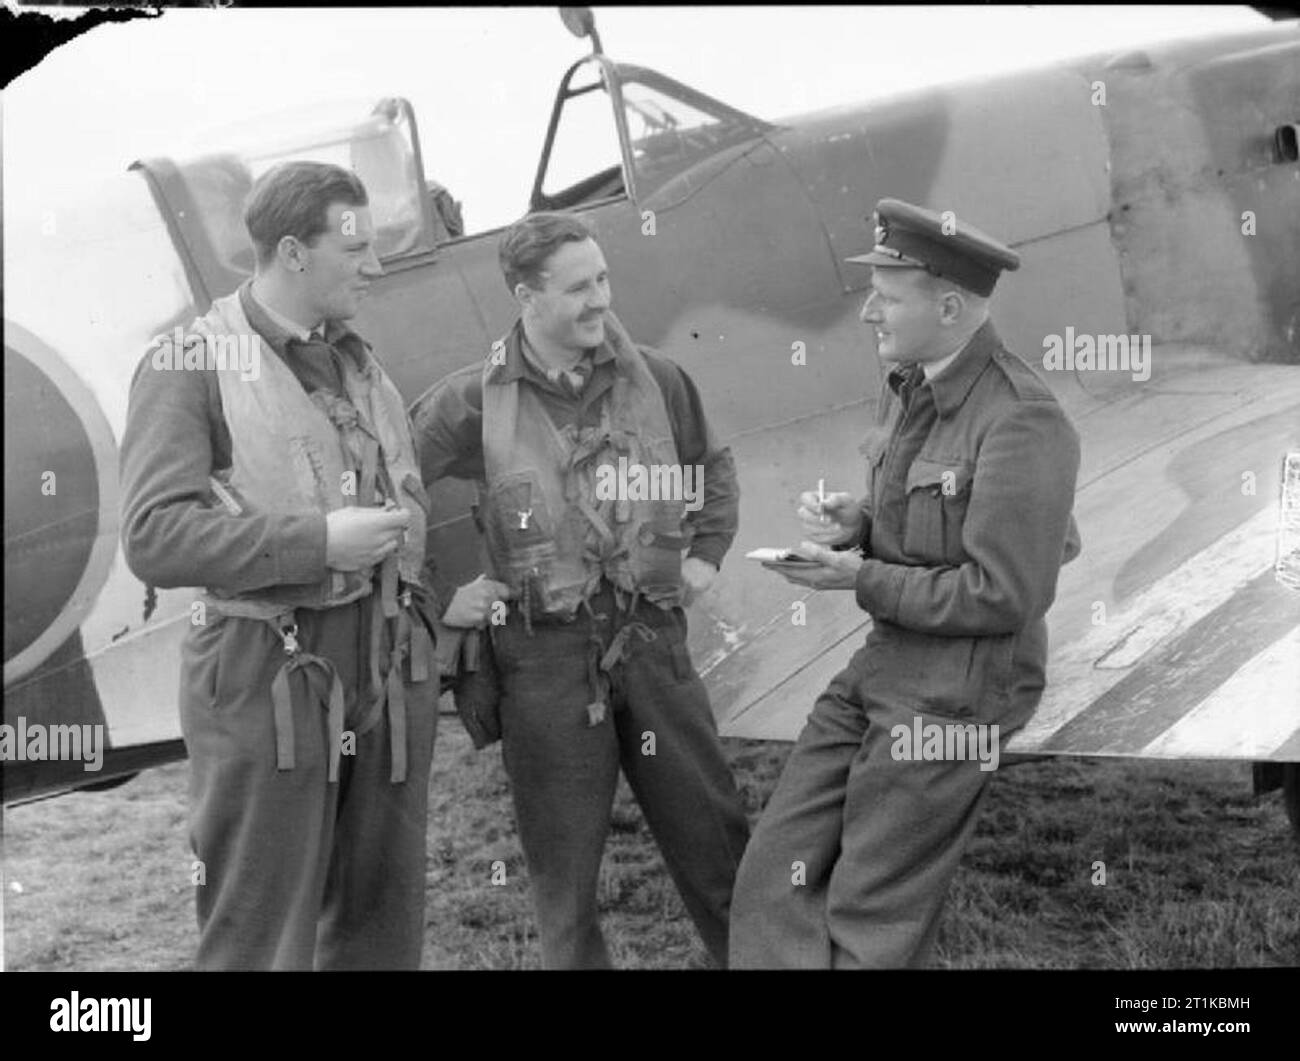 Royal Air Force- Air Defence of Great Britain (adgb), 1943-1944. The OVERLORD DIVER Plan. Flying Officer E Topham (left) and Flight Lieutenant R Nash of No. 91 Squadron RAF give their reports to the Squadron Intelligence Officer, Flying Officer C Kember (right), at West Malling, Kent, after an anti-'Diver' patrol (sortie against flying bombs) over south-east England. Topham, a New Zealander, and Nash, from London, were among the top-scoring pilots in this work, shooting down 15 and 16.5 flying bombs respectively. Stock Photo